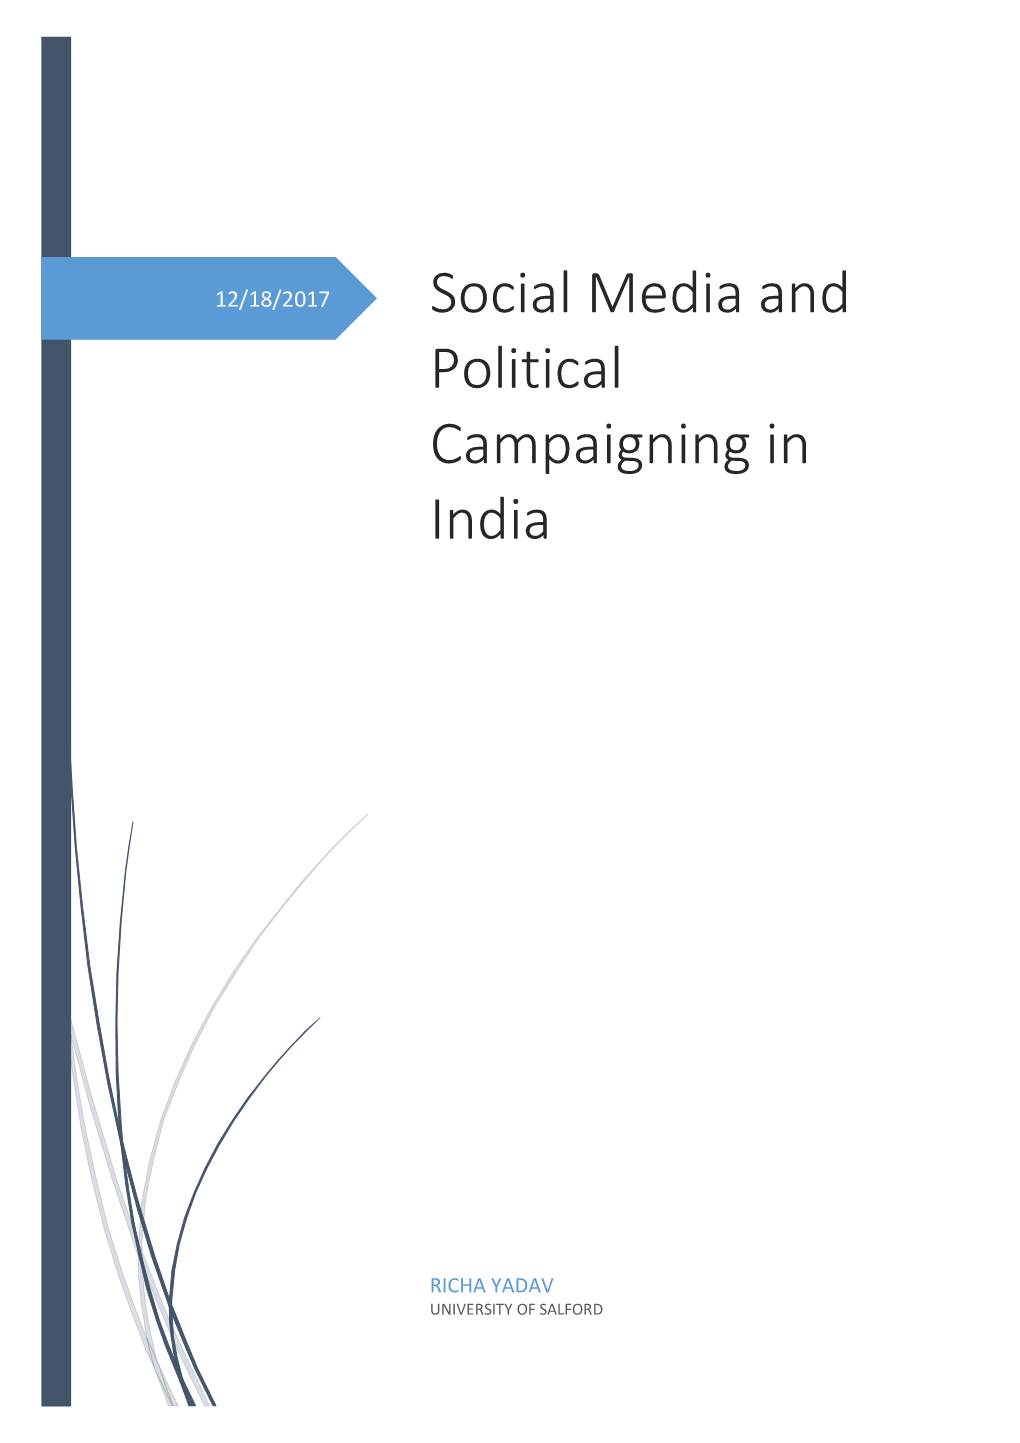 Social Media and Political Campaigning in India